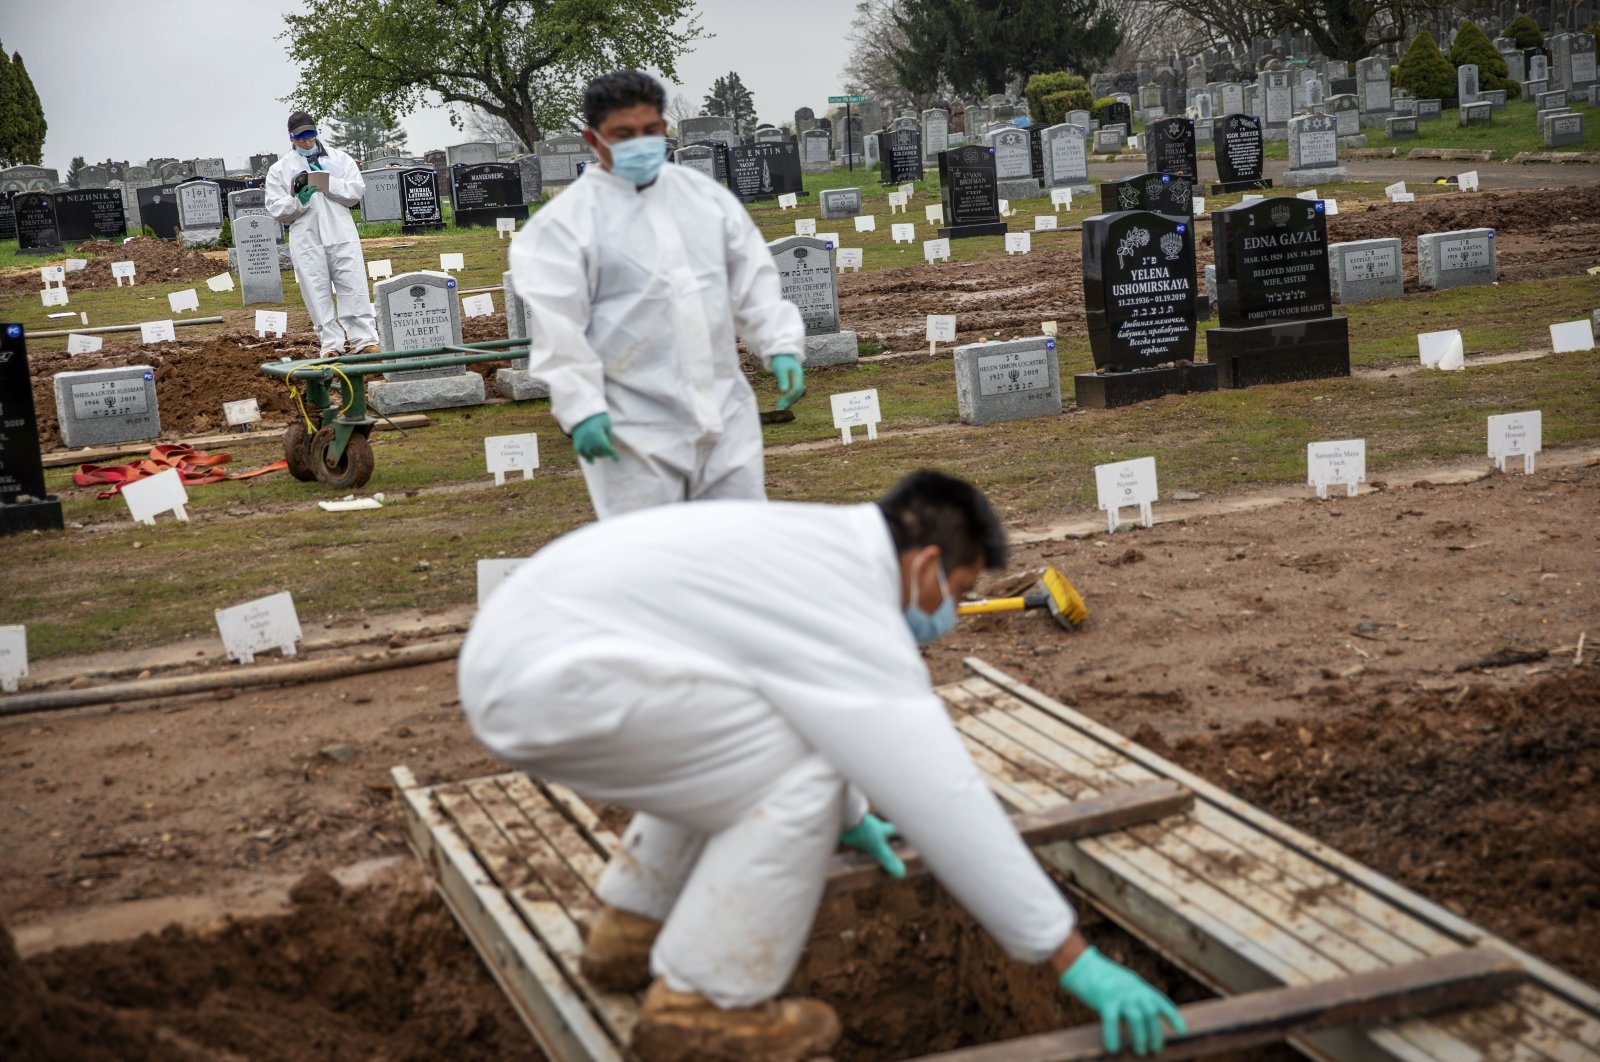 A rabbi (in the background) finishes a prayer during a burial service as gravediggers prepare a plot for the next burial at a cemetery in Staten Island, New York, April 8, 2020. (AP Photo)